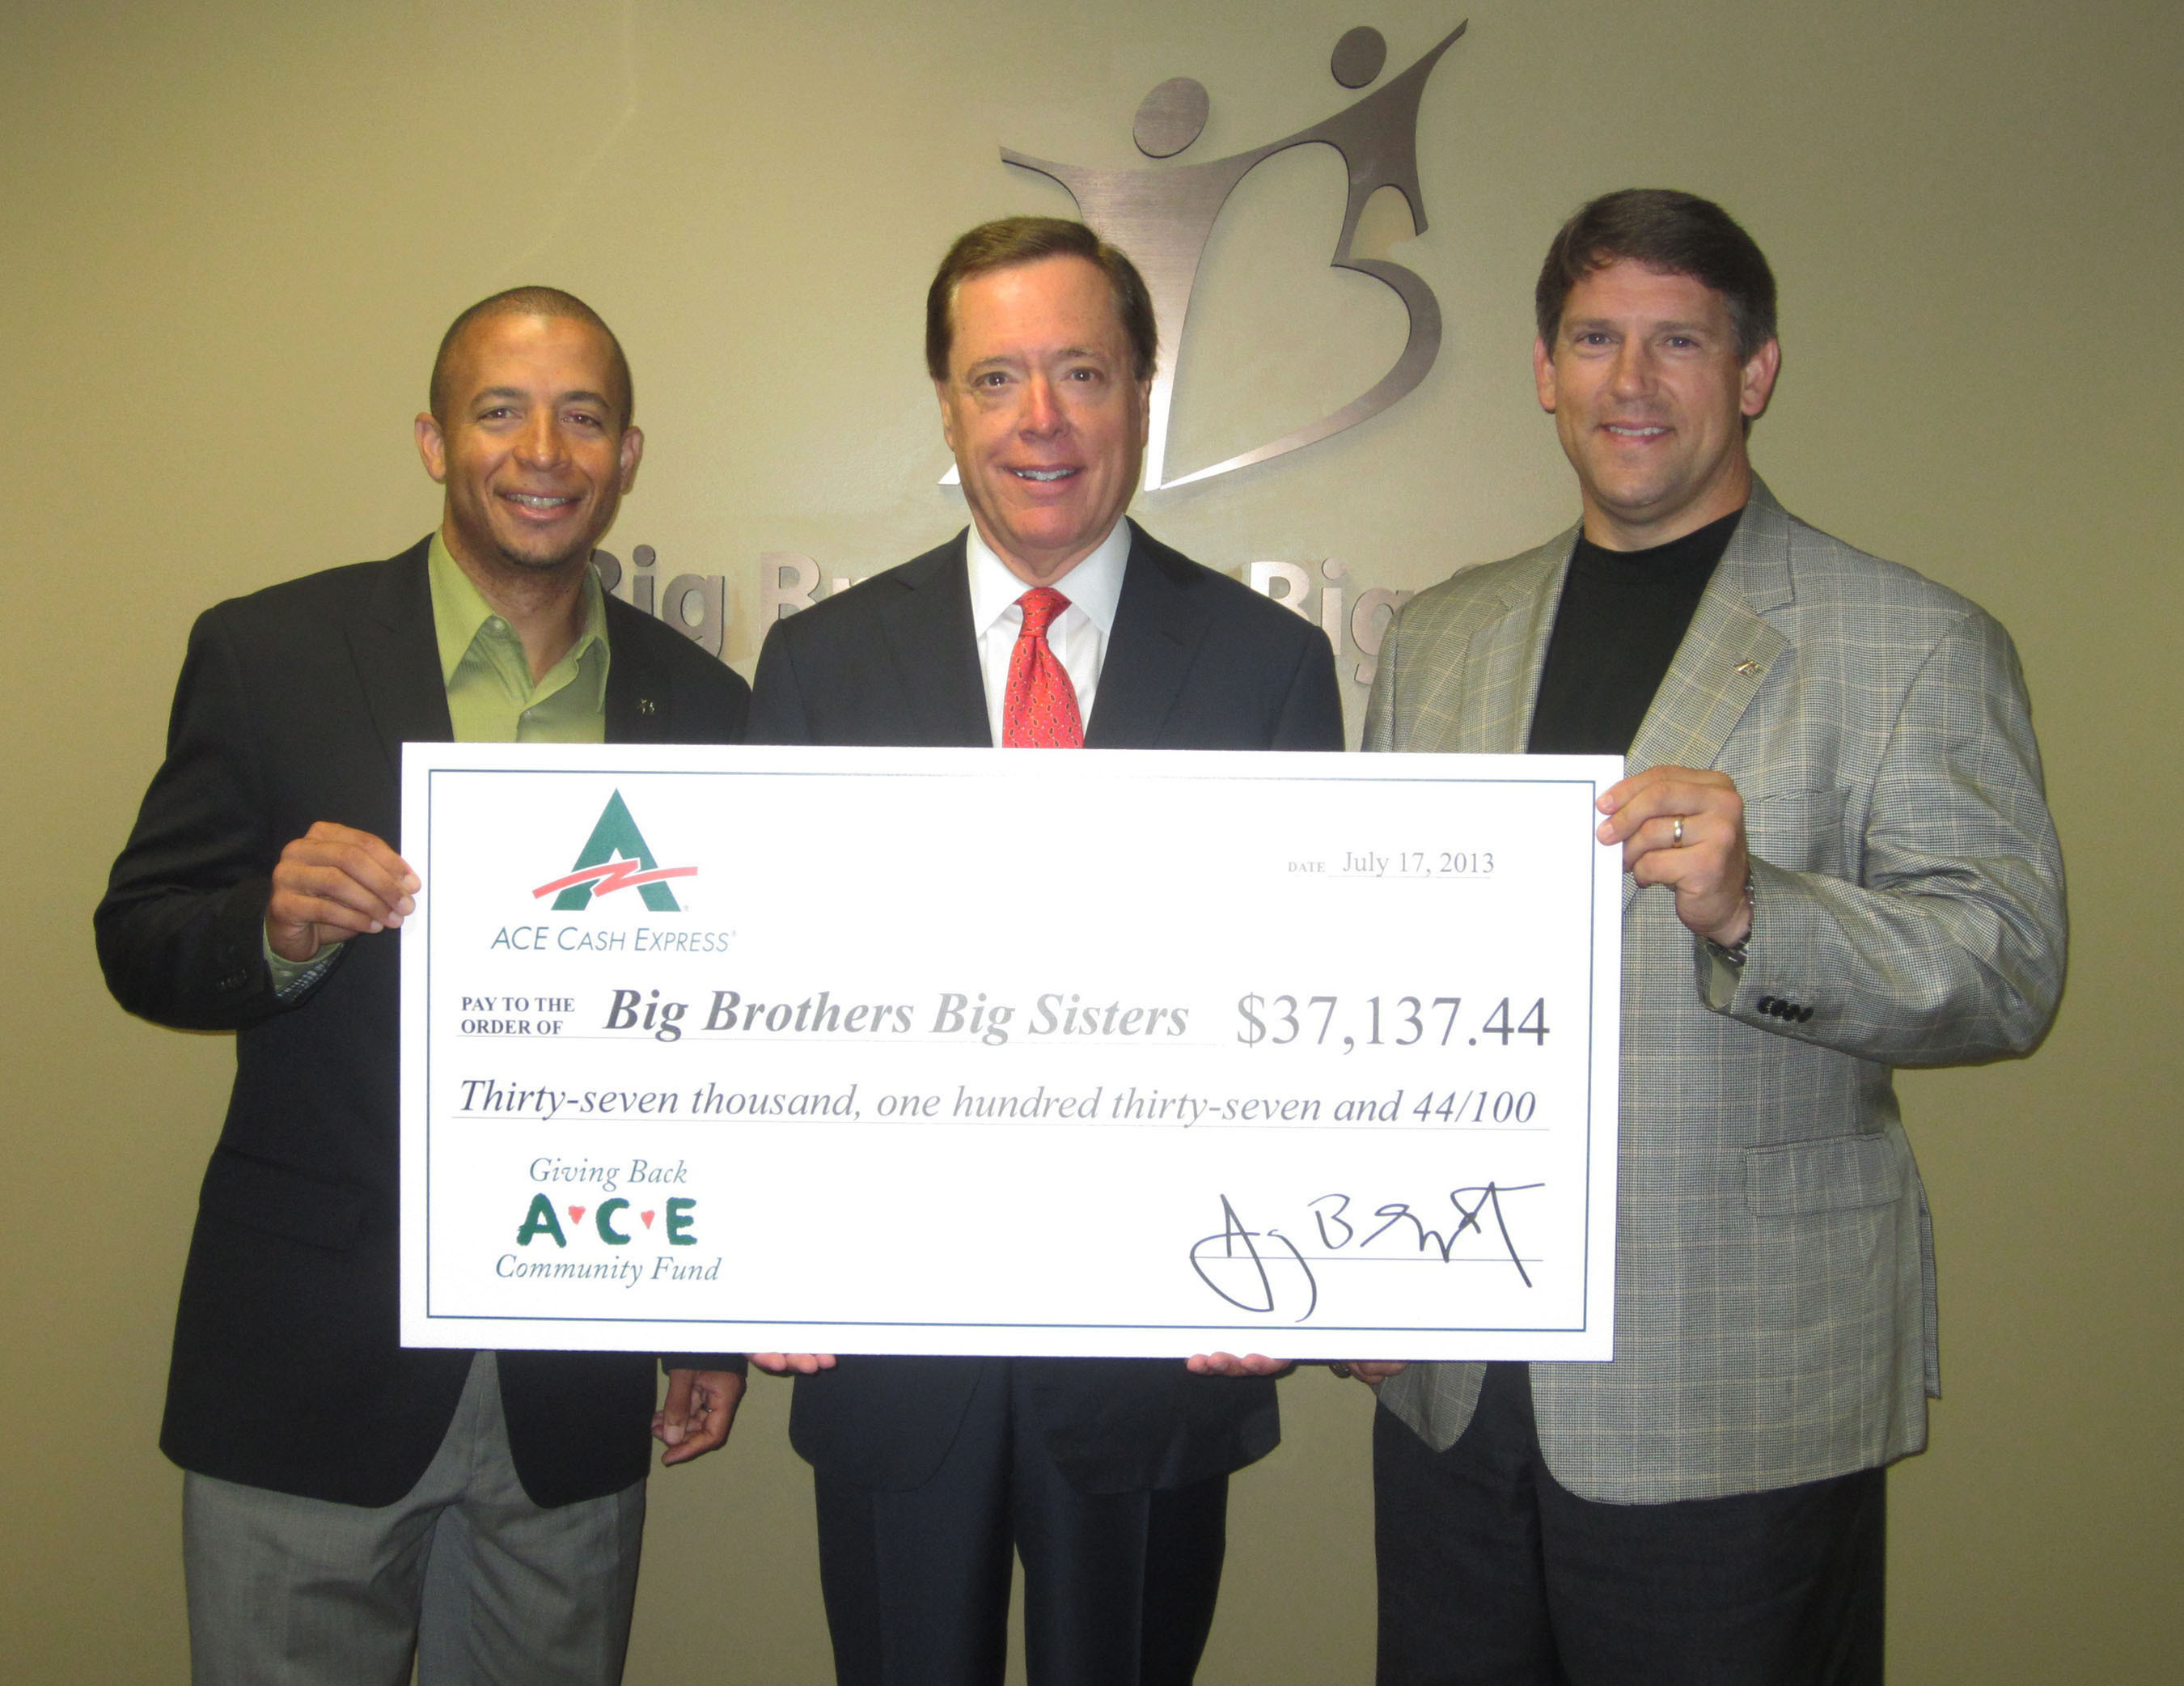 Big Brothers Big Sisters CEO Charles Pierson and VP of National Events and Sponsorships Charleston Edwards accept donation from ACE SVP of Public Affairs Eric Norrington. (PRNewsFoto/ACE Cash Express) (PRNewsFoto/ACE CASH EXPRESS)